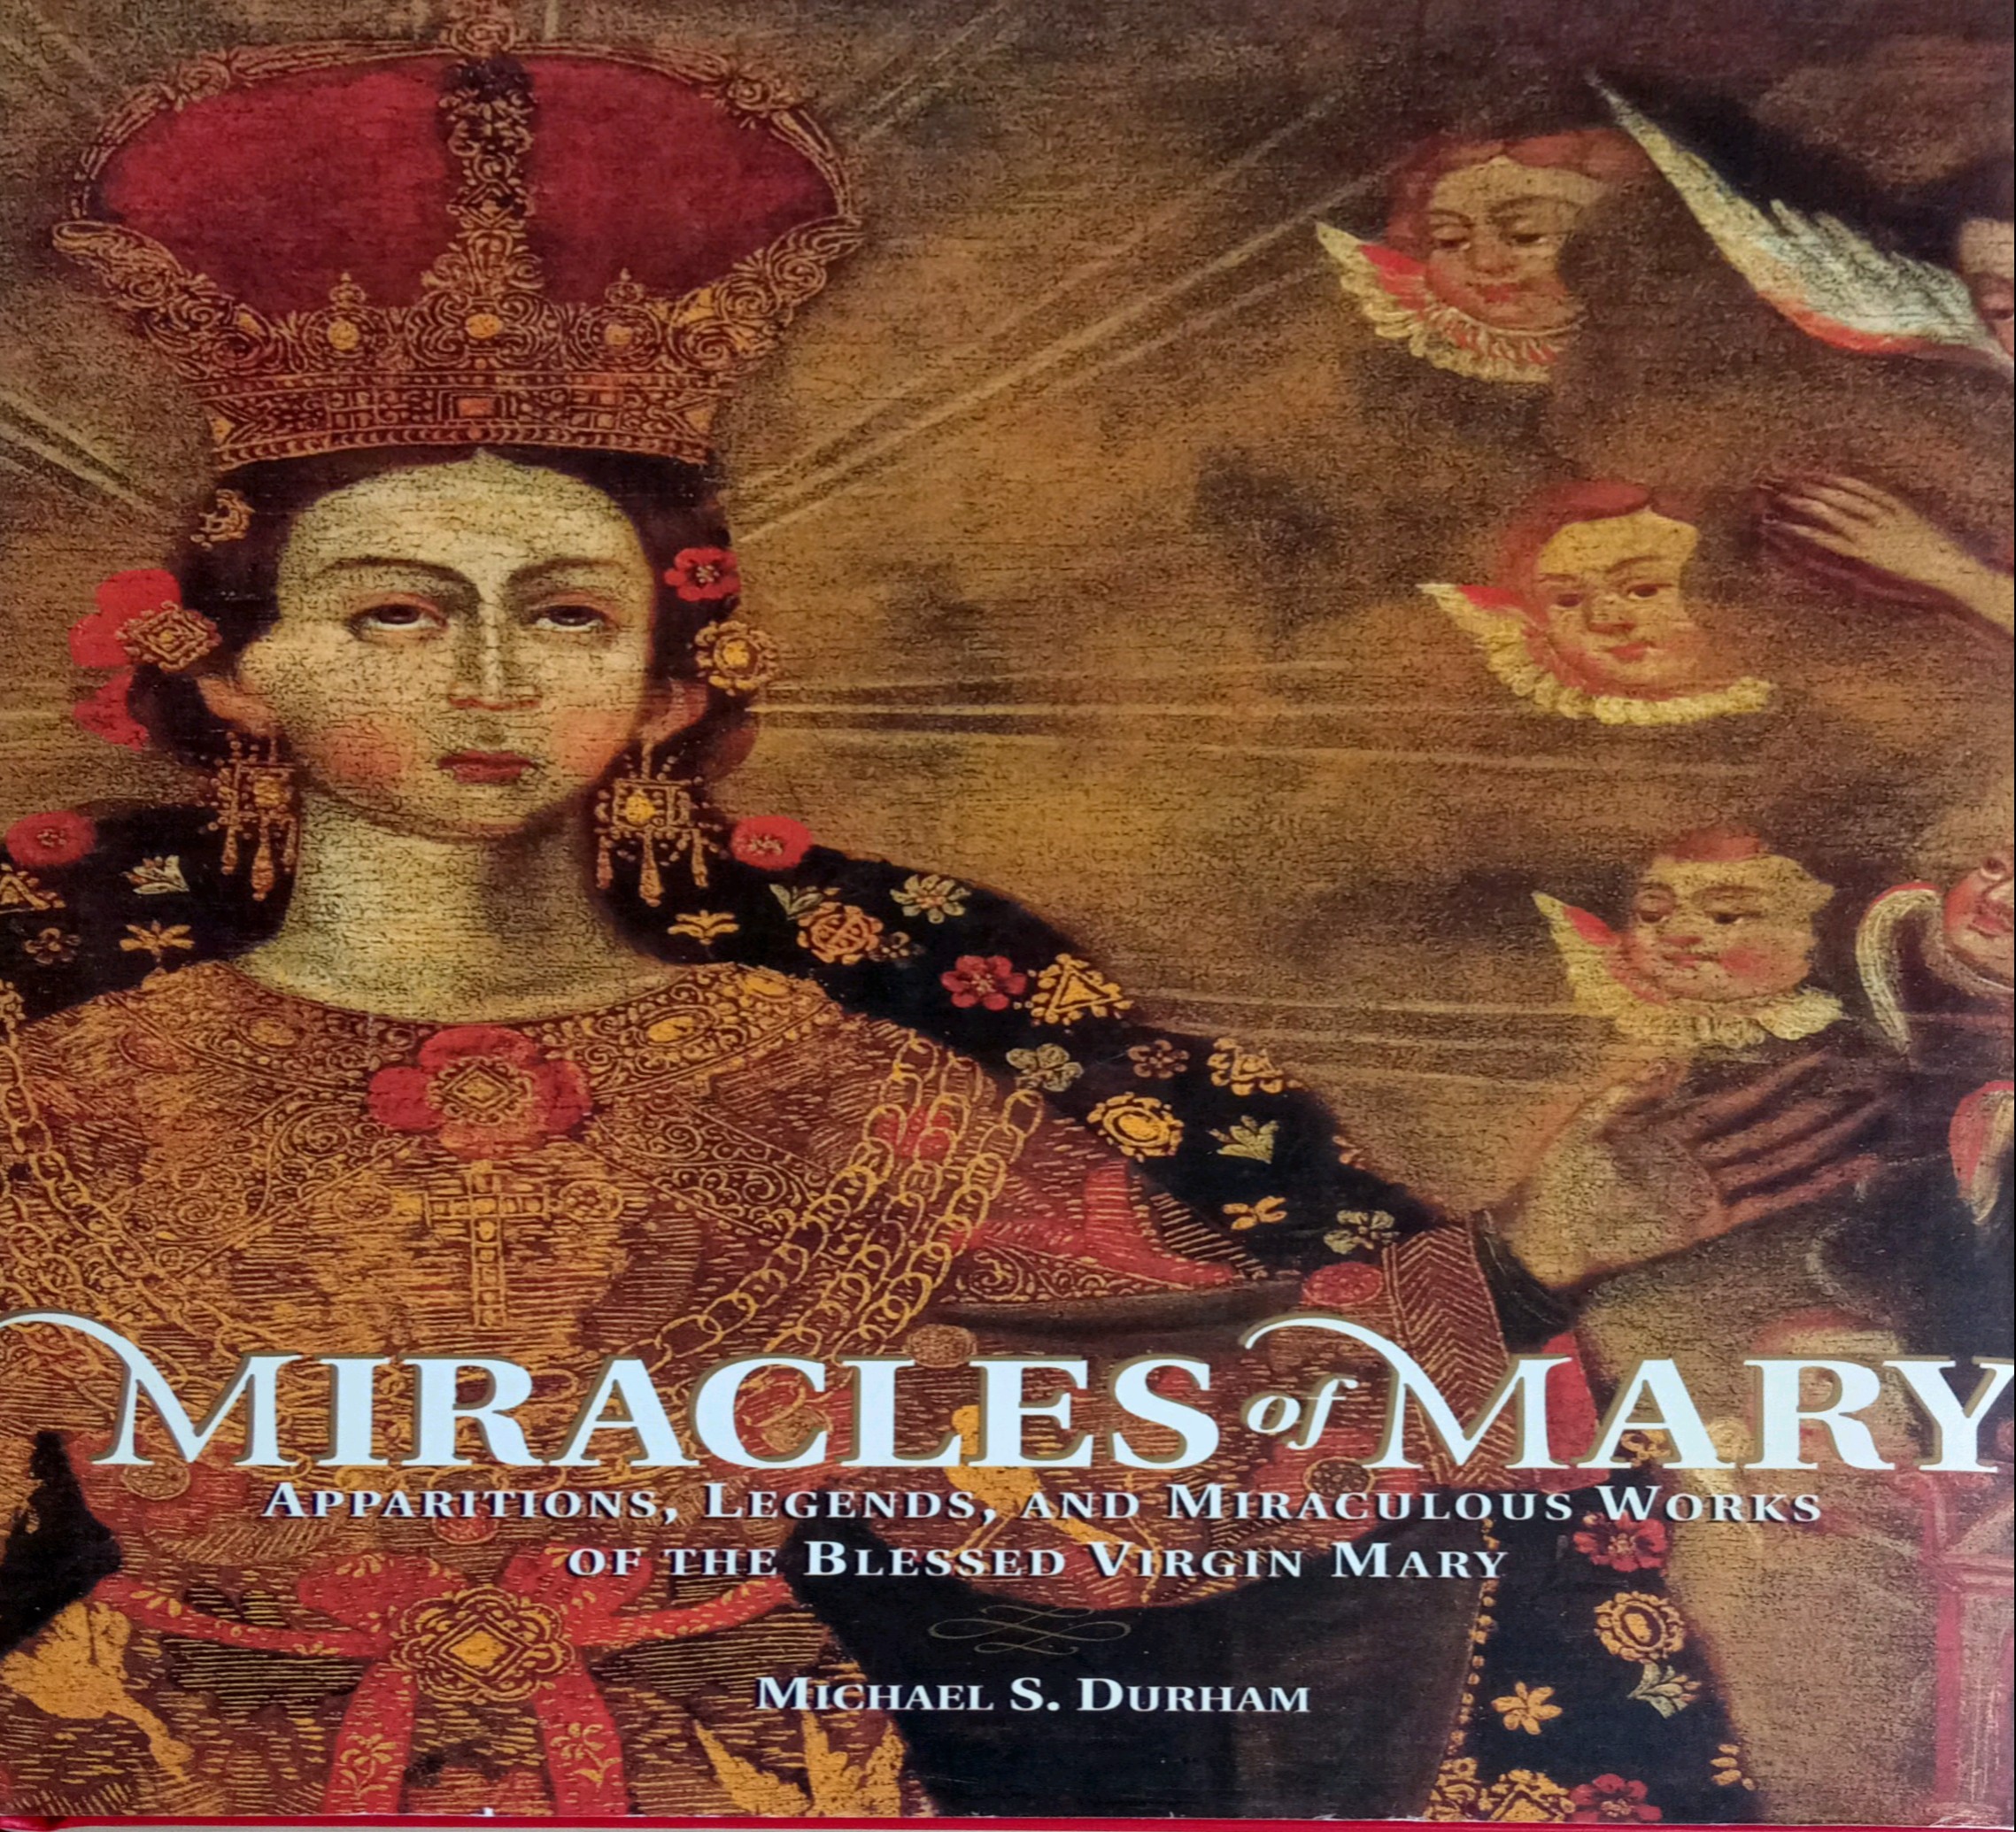 MIRACLES OF MARY